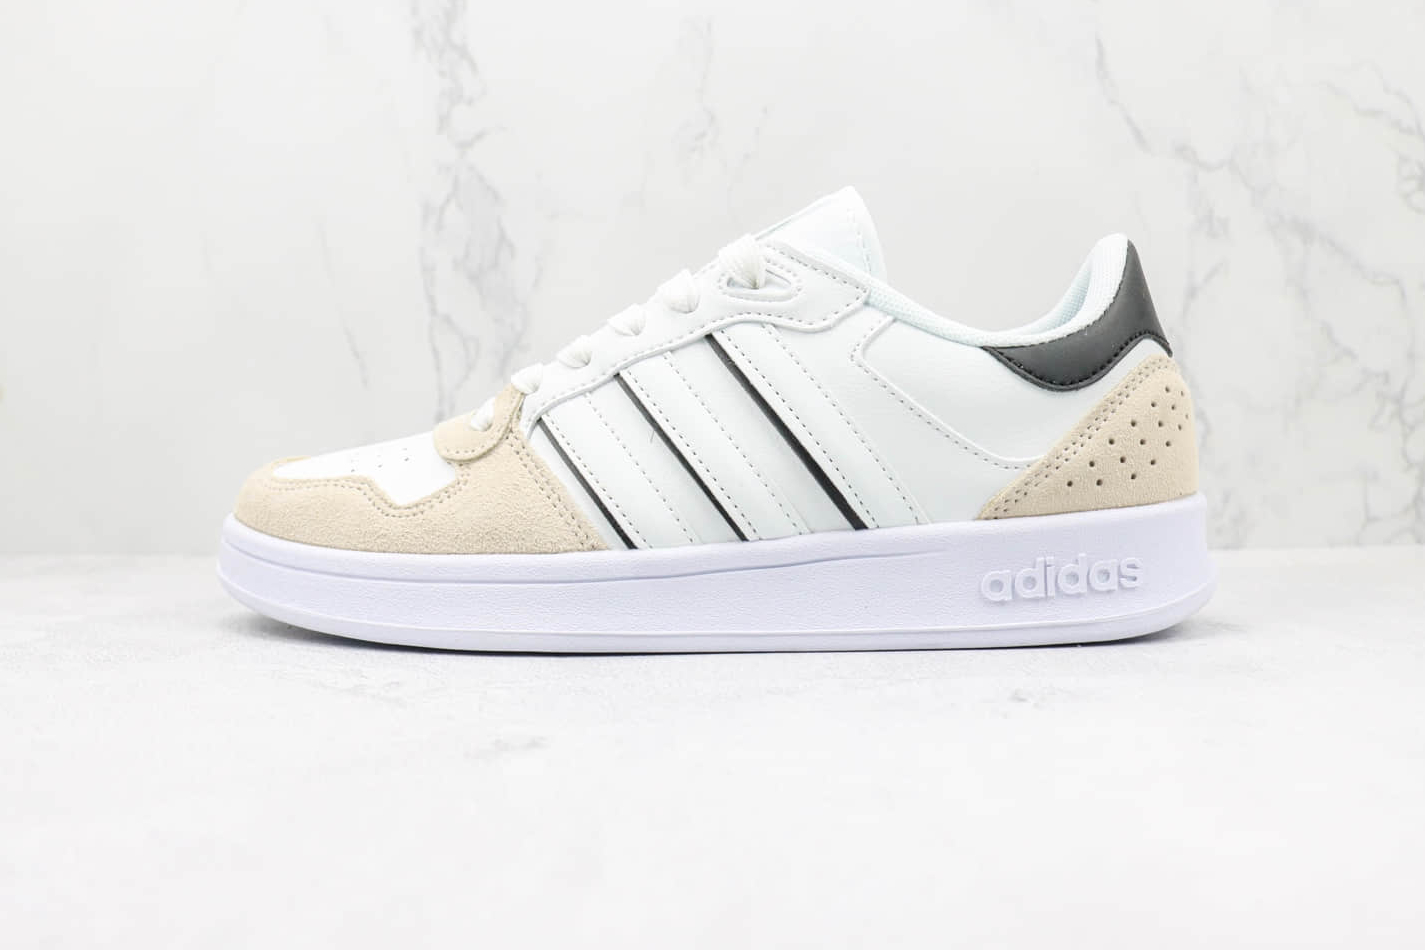 Adidas Neo Breaknet Plus FY5914 - Classic Style with Modern Appeal